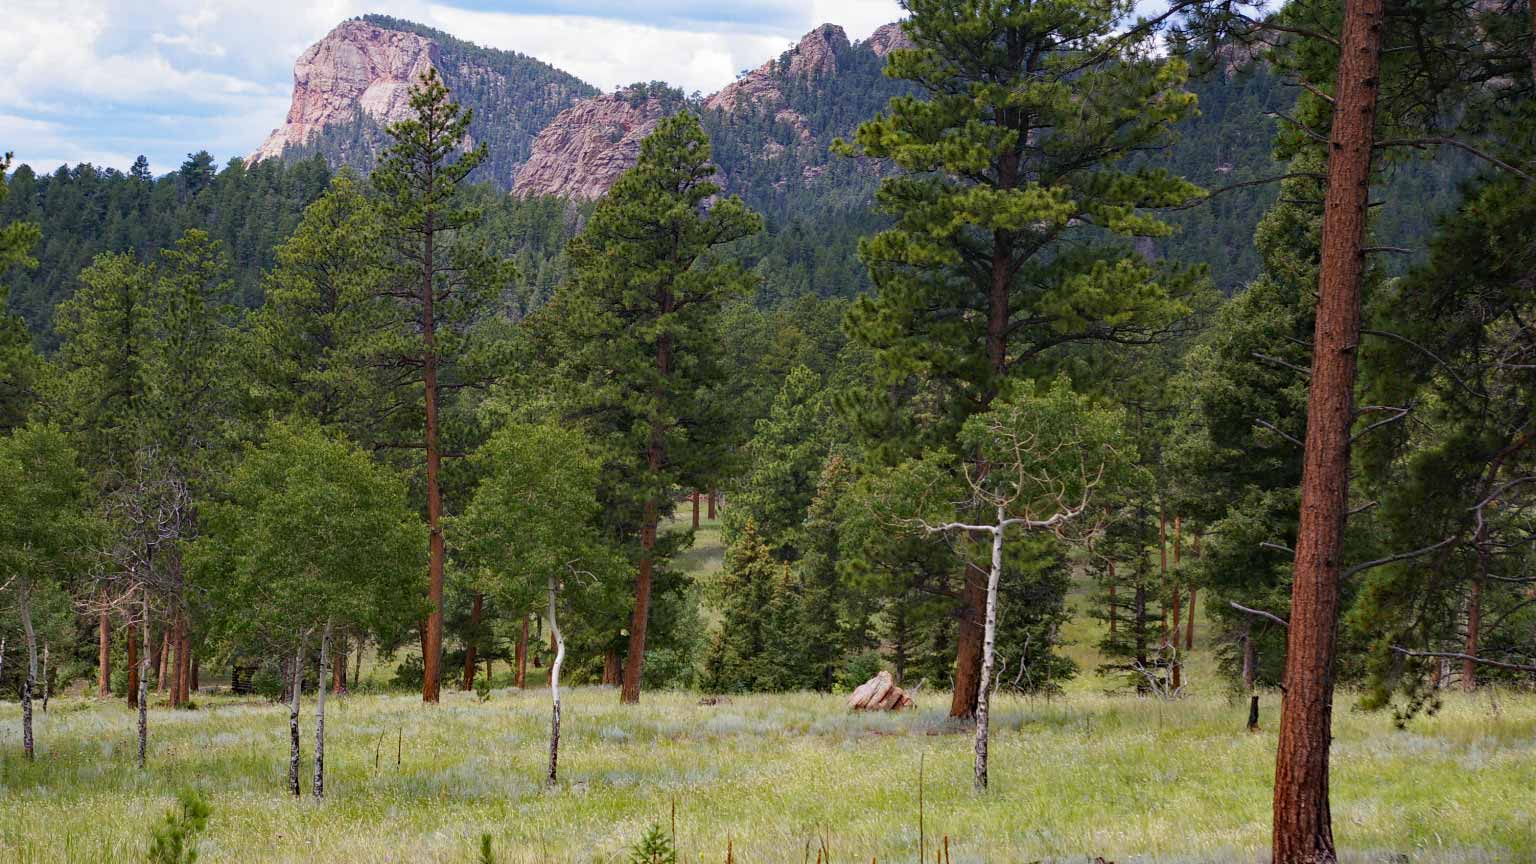 a photo of a meadow and ponderosa pines with mountain in the background